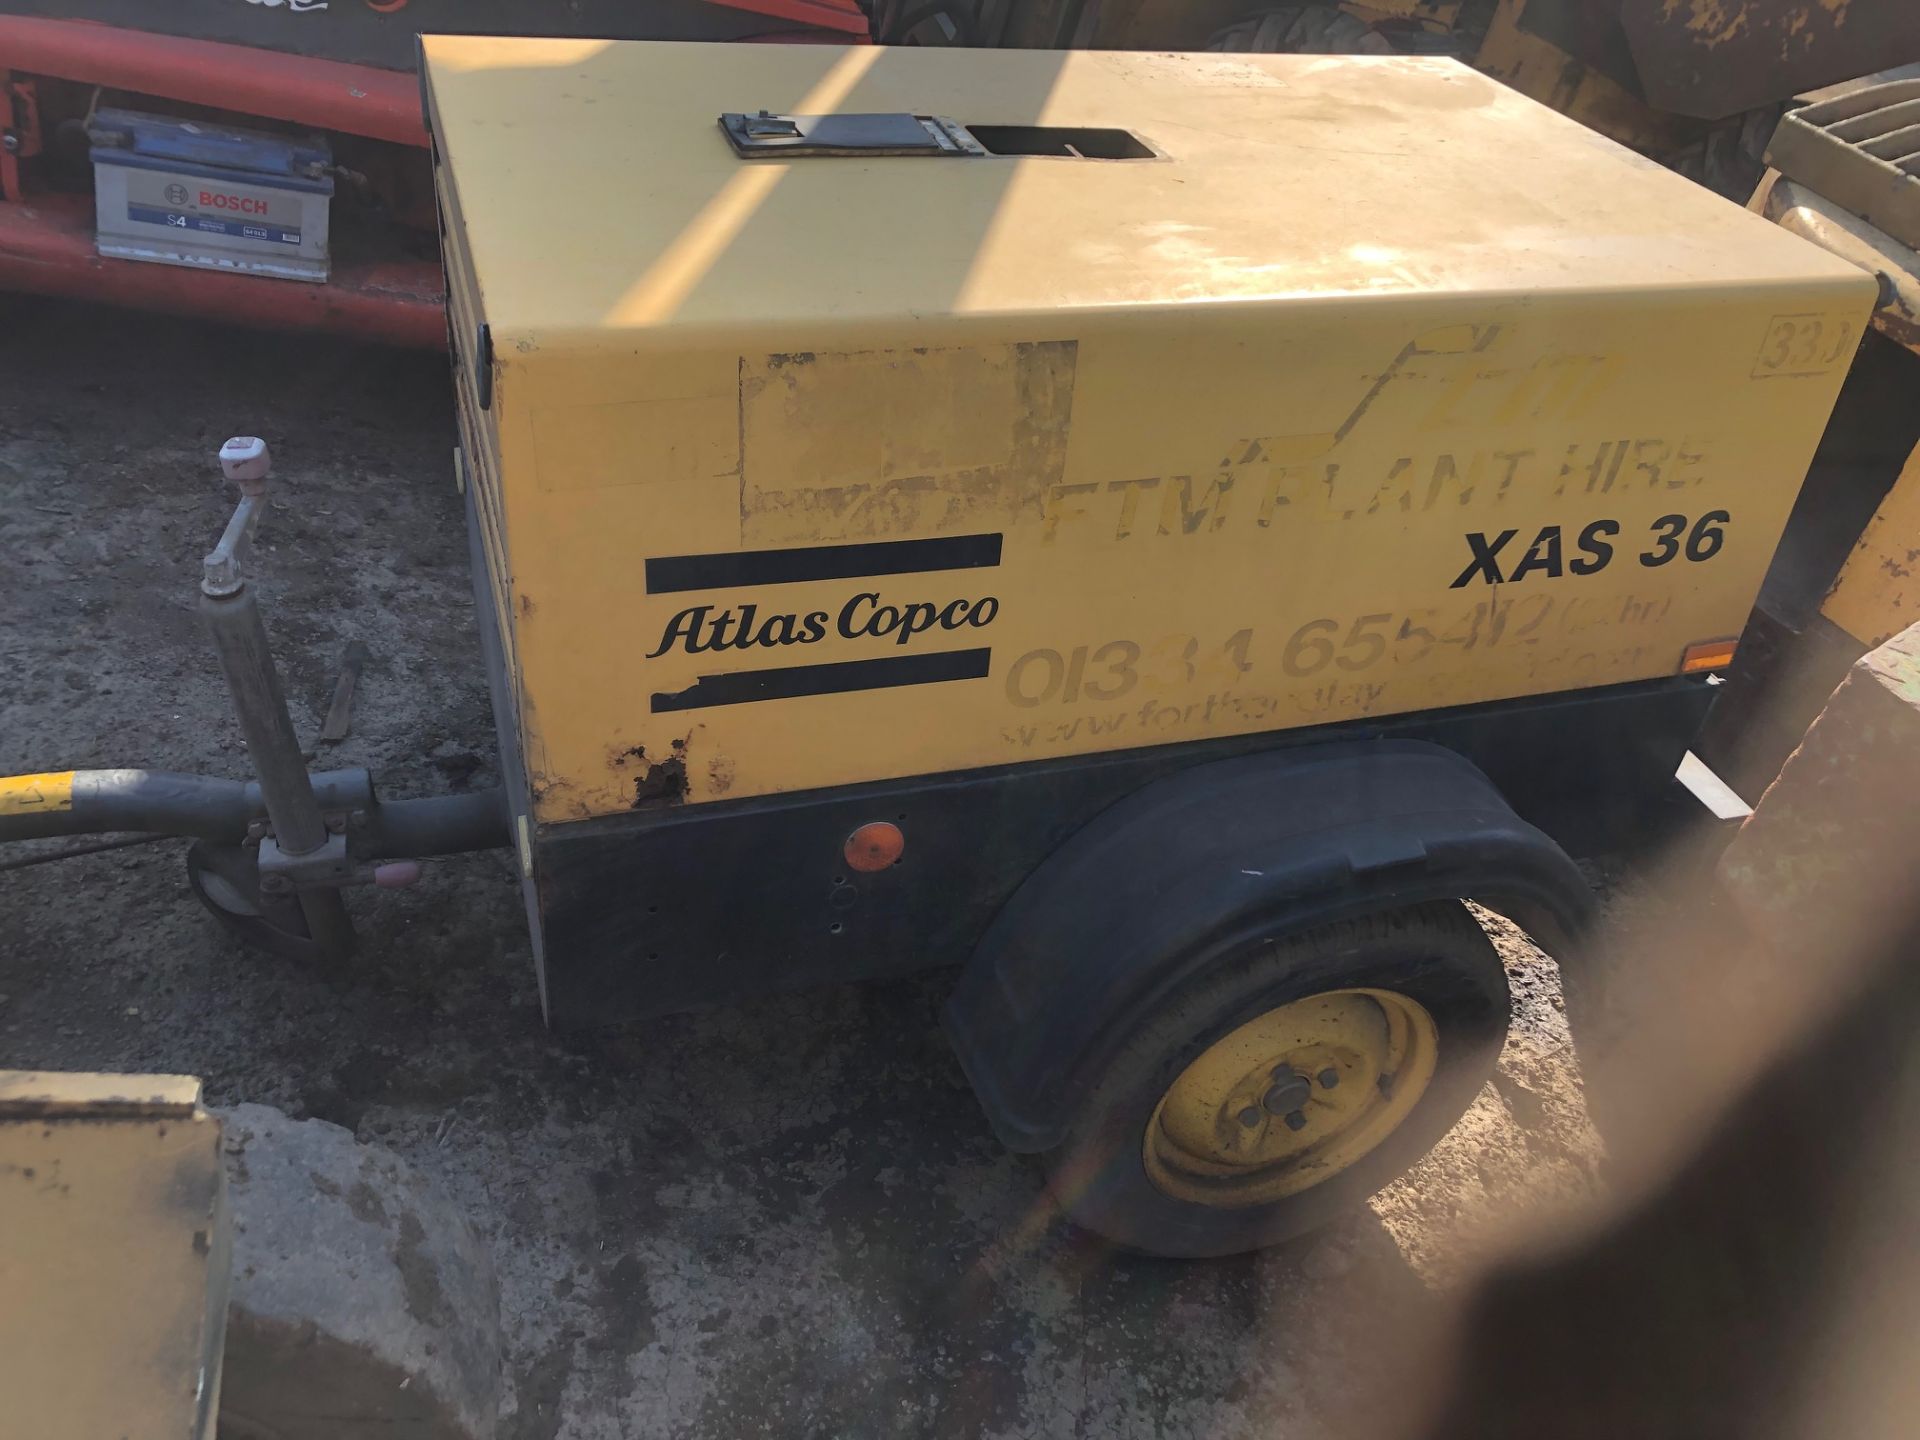 2005 ATLAS COPCO XAS36 COMPRESSOR, TOP MISSING OFF RECEIVER AS PICTURED, YANMAR ENGINE, 1400 HOURS - Image 7 of 8